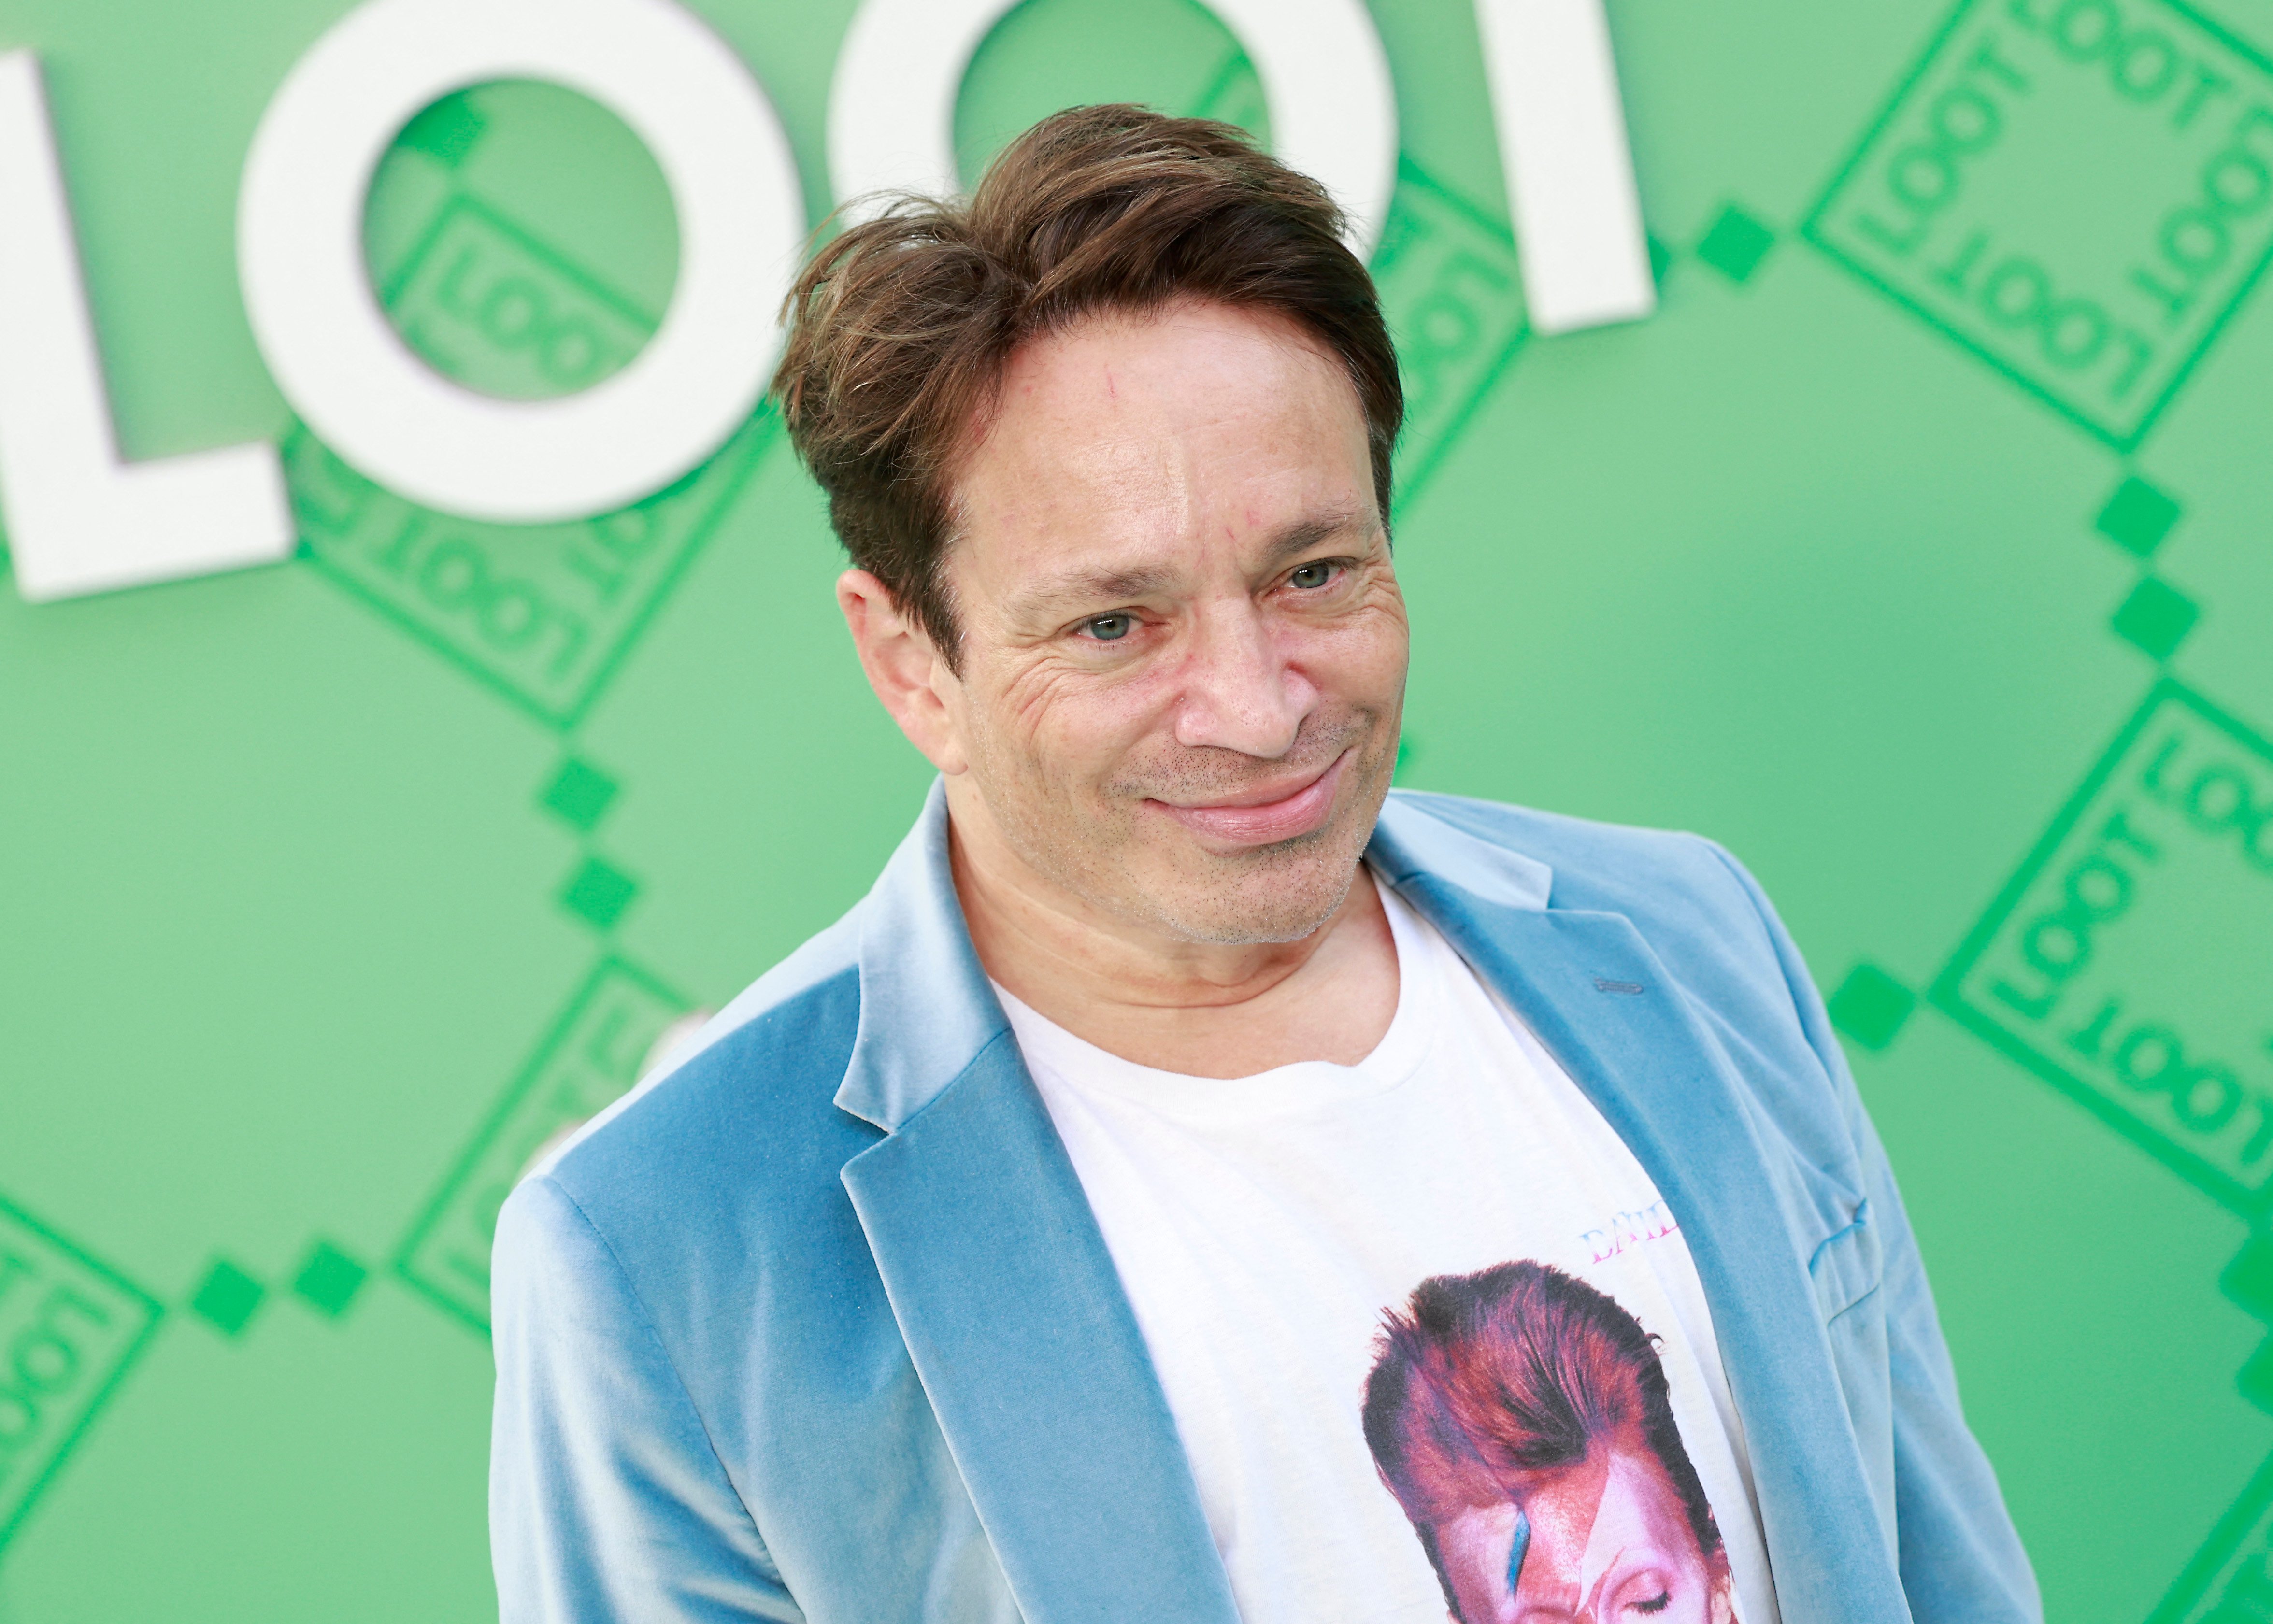 Chris Kattan Didn’t Know About His ‘Nope’ Mention; His Reaction and the Character That Inspired the Name Drop in Jordan Peele’s Film